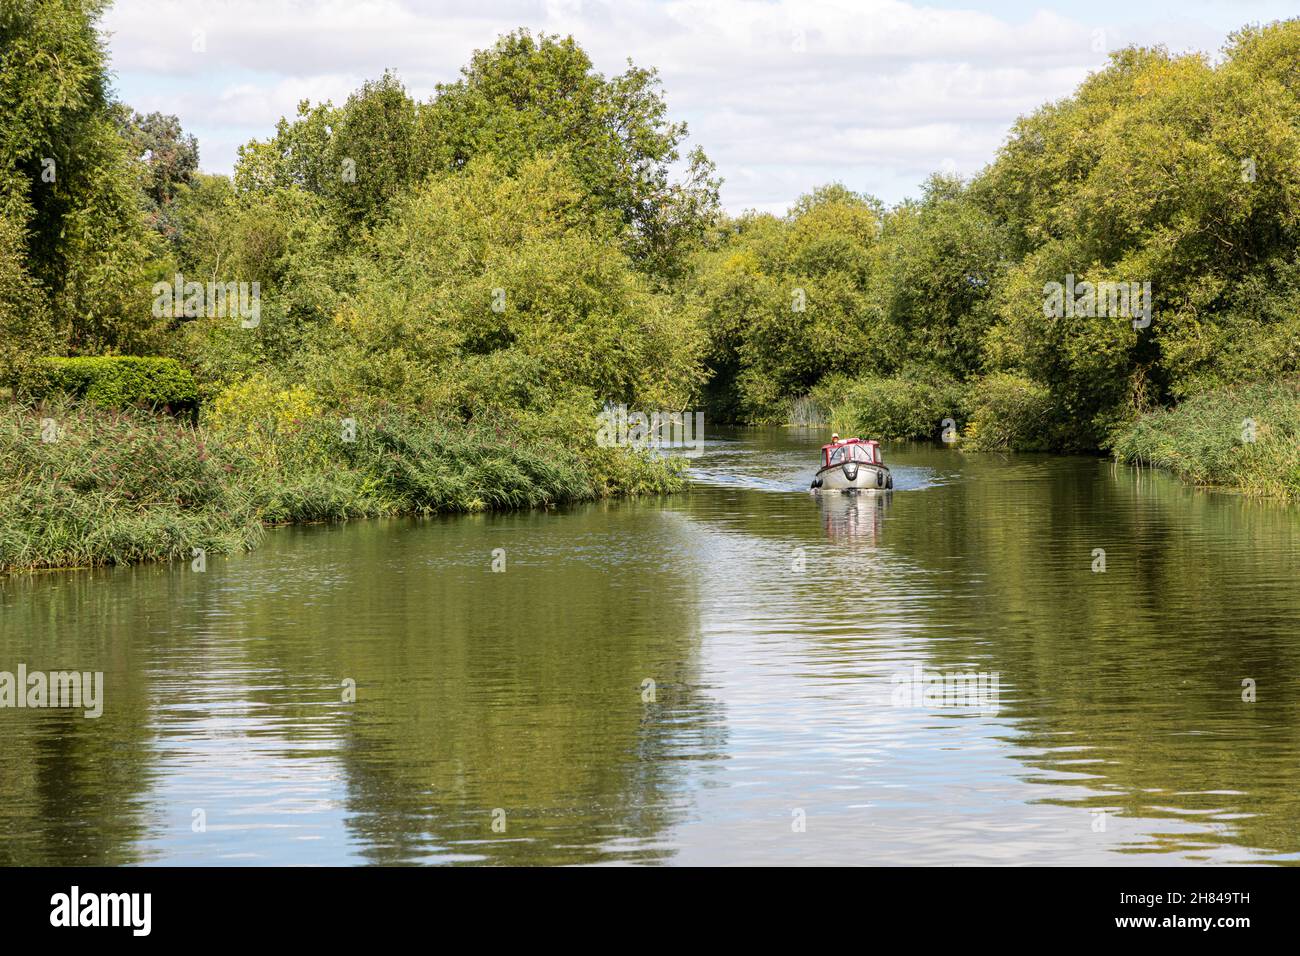 River Great Ouse, St Neots, Cambridgeshire. Stock Photo